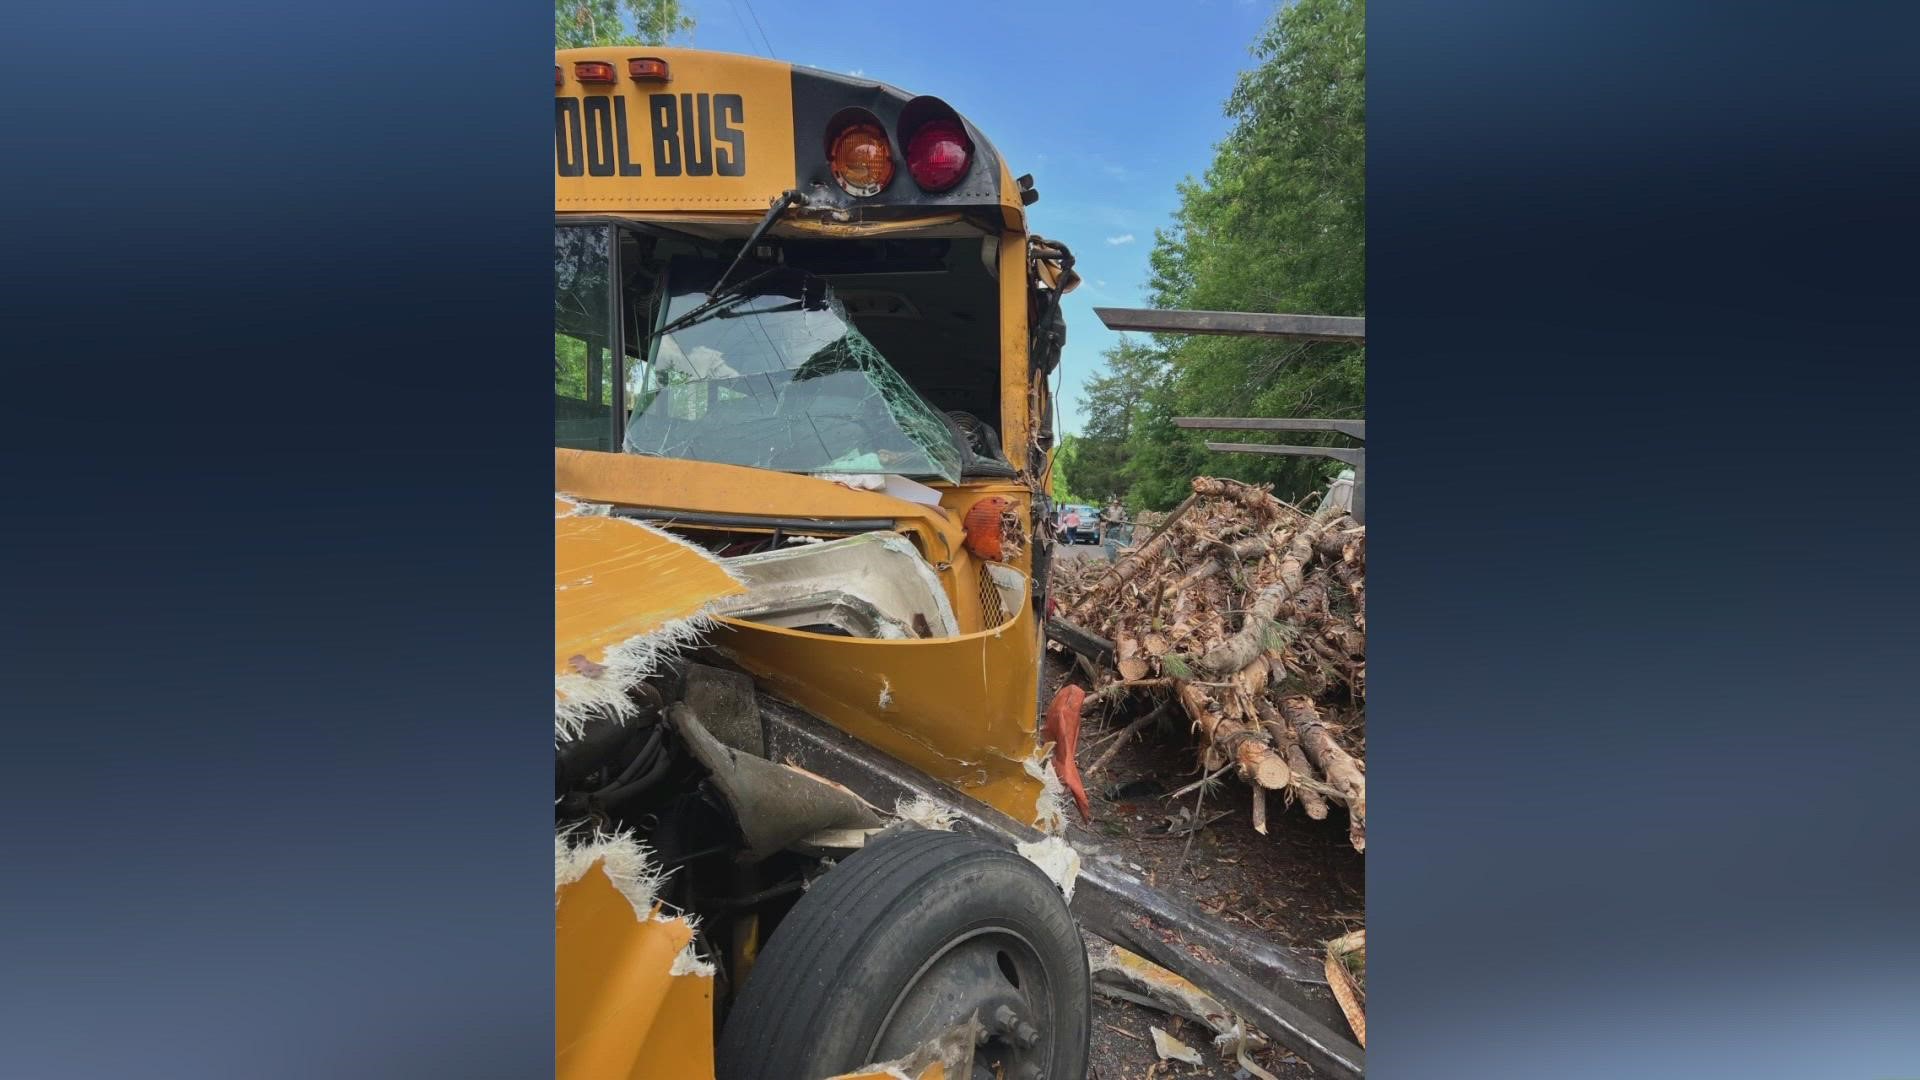 15 students were on the bus at the time of crash, minor injuries have been reported.